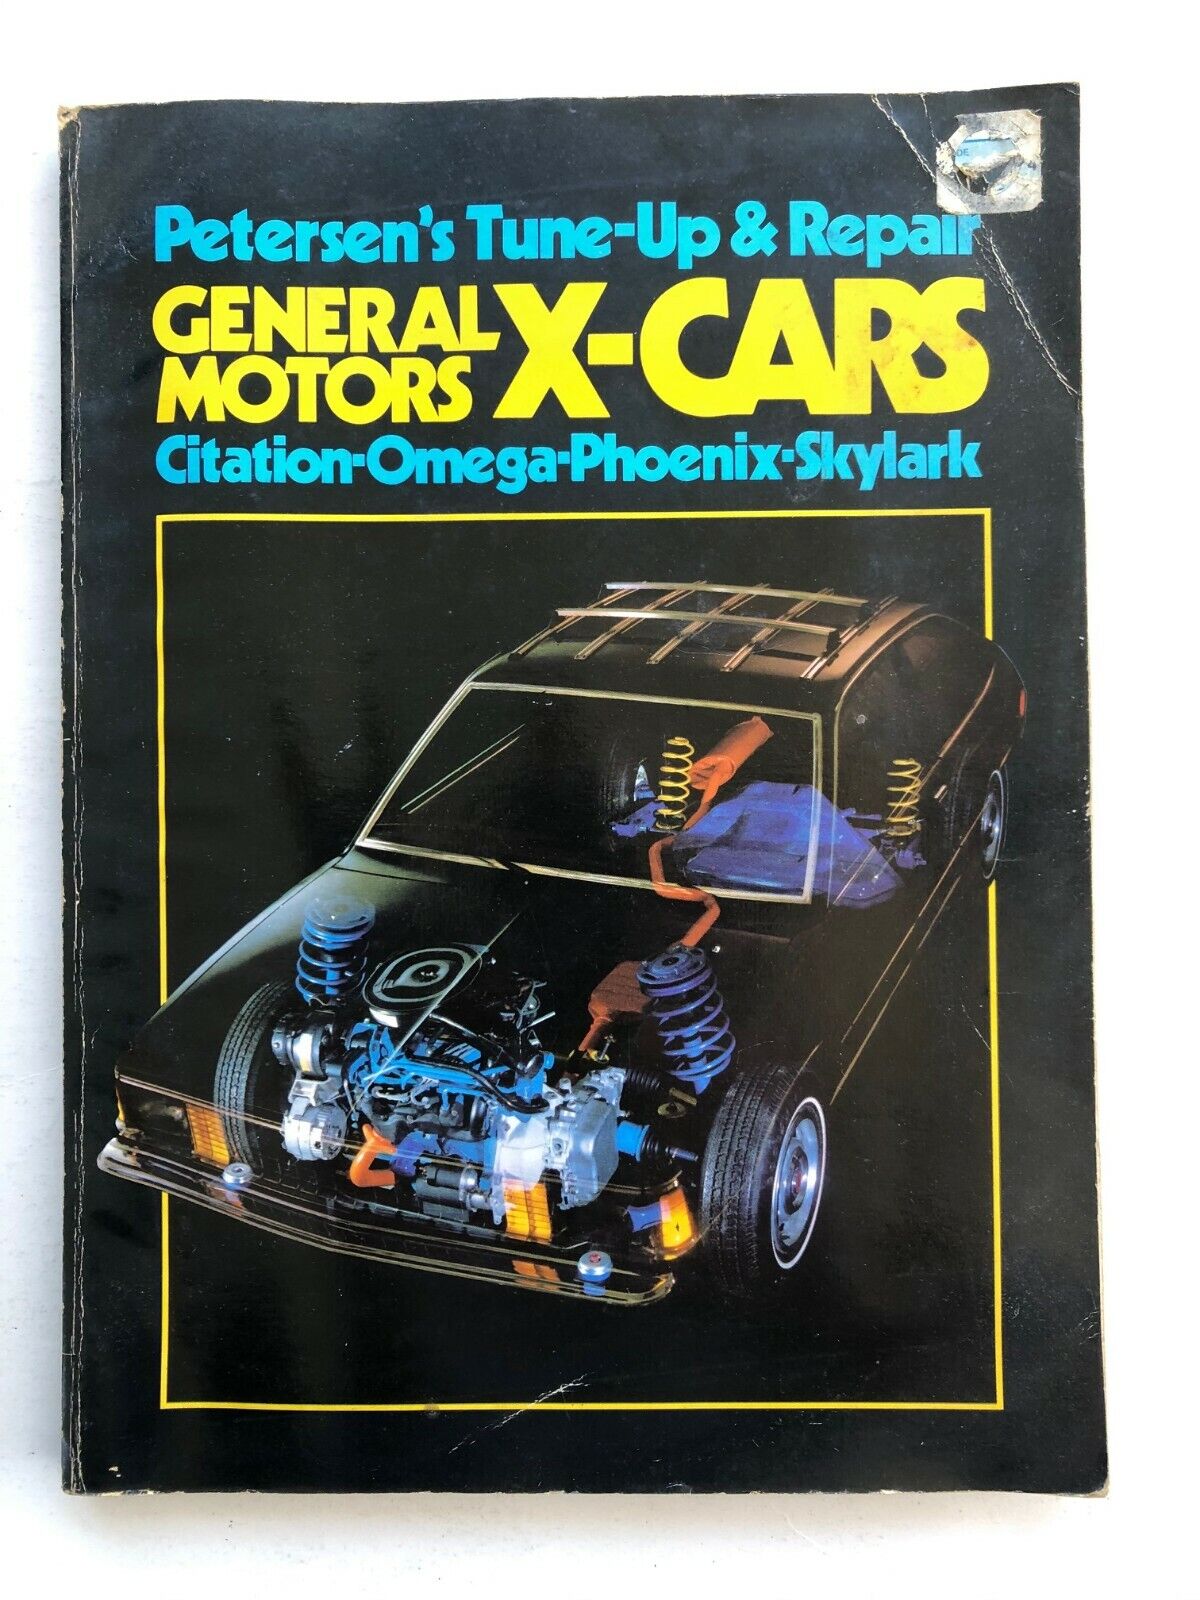 Petersen's Tune-Up and Popular brand Japan's largest assortment in the world Repair GM Omega S Citation Phoenix X-Cars